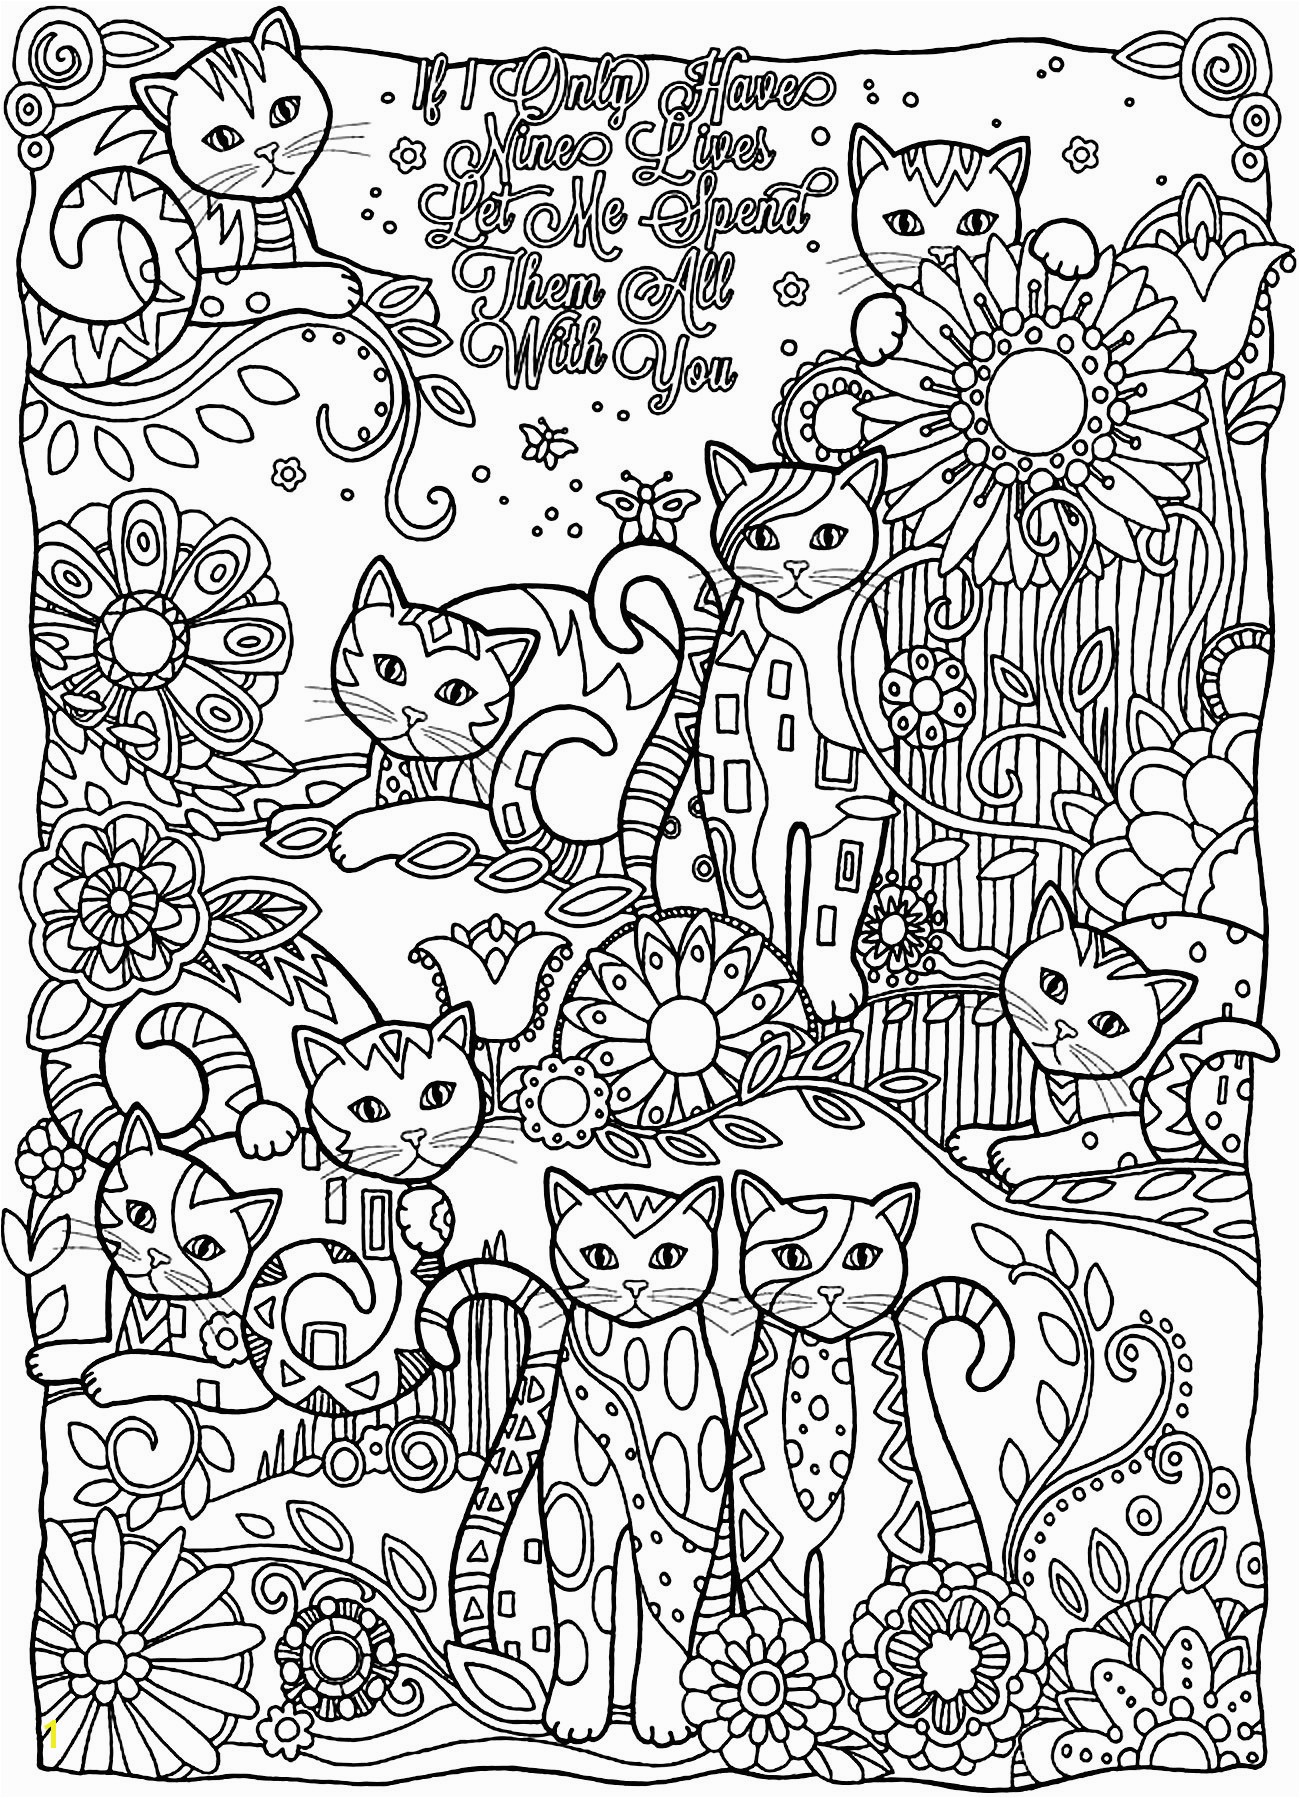 Bridge to Terabithia Coloring Pages Scary Black Cat Coloring Pages Luxury Zentangle Coloring Pages Fresh